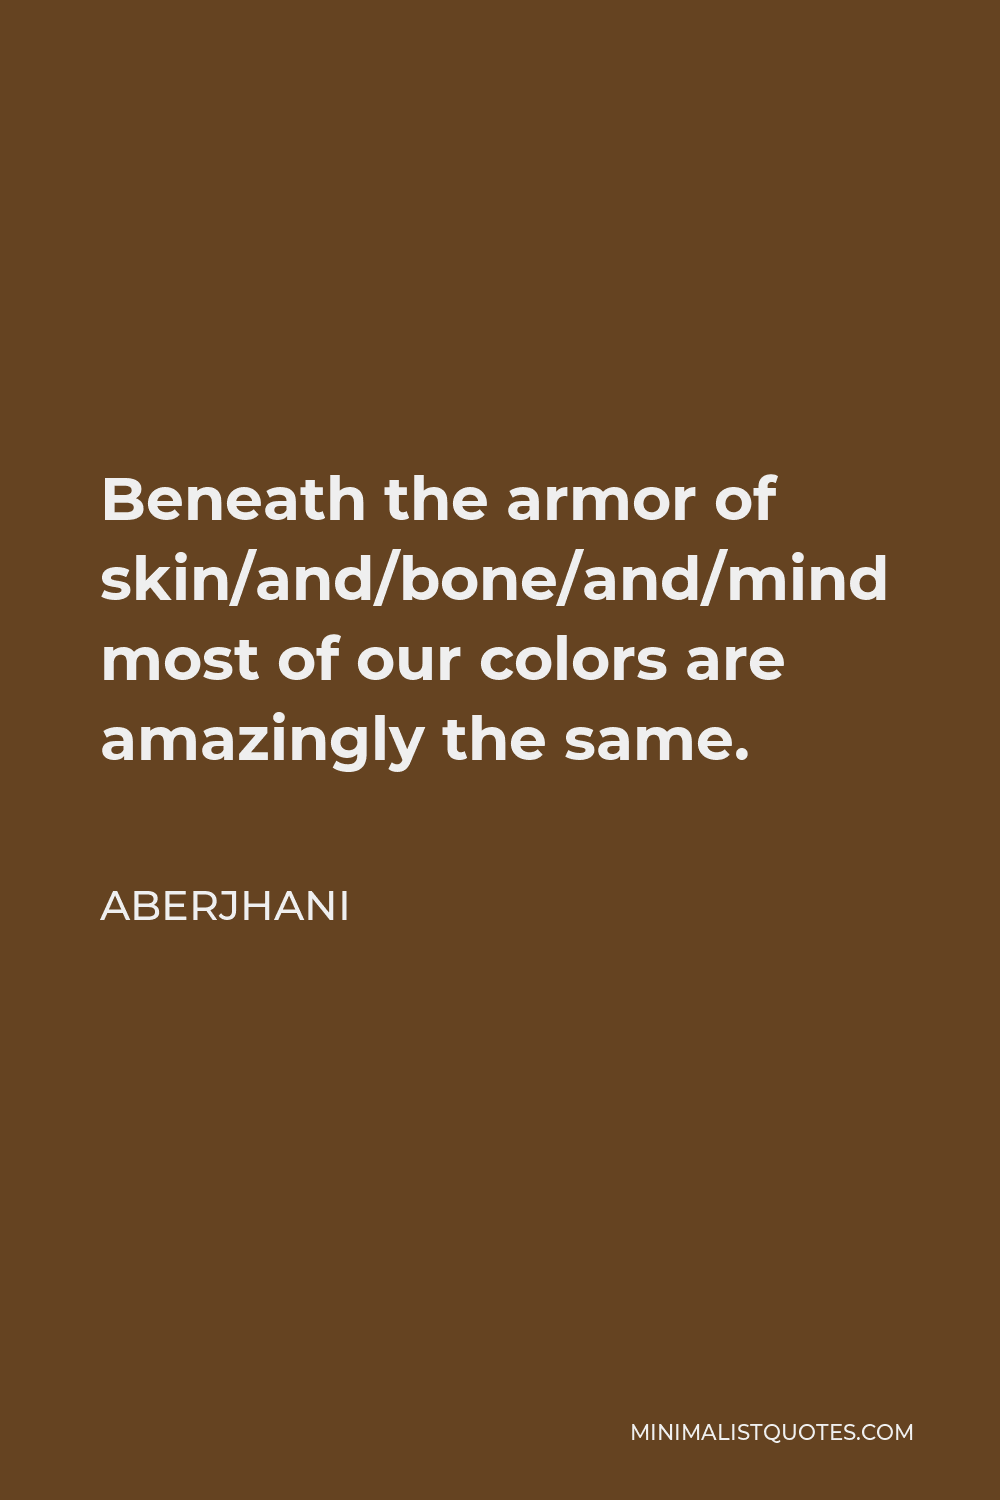 Aberjhani Quote - Beneath the armor of skin/and/bone/and/mind most of our colors are amazingly the same.